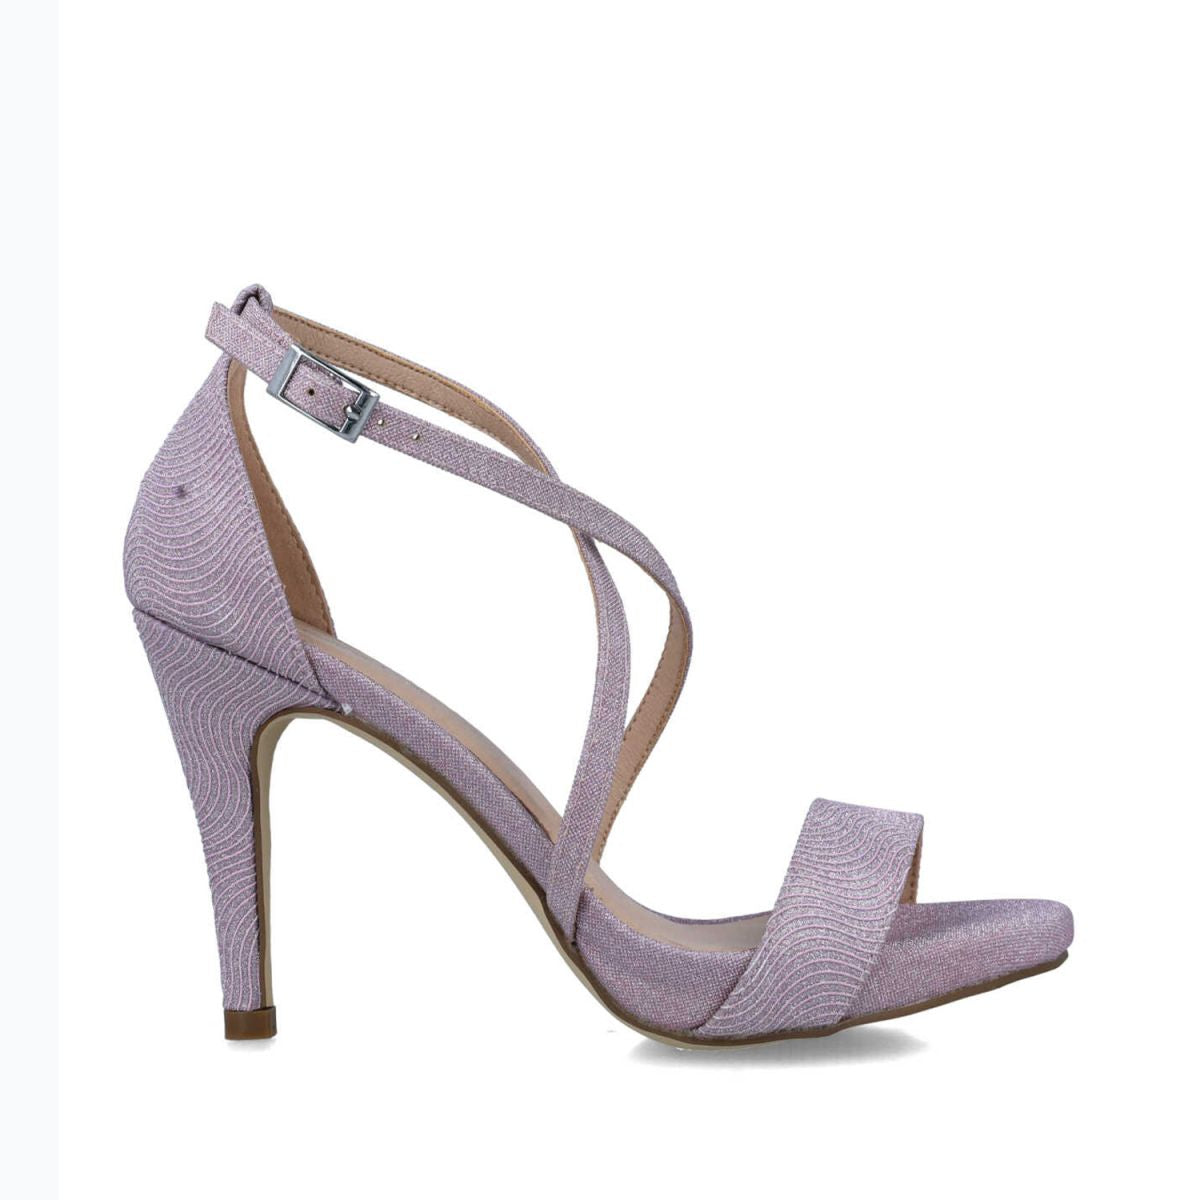 Feminine Pink Strappy Sandals for Evening Wear